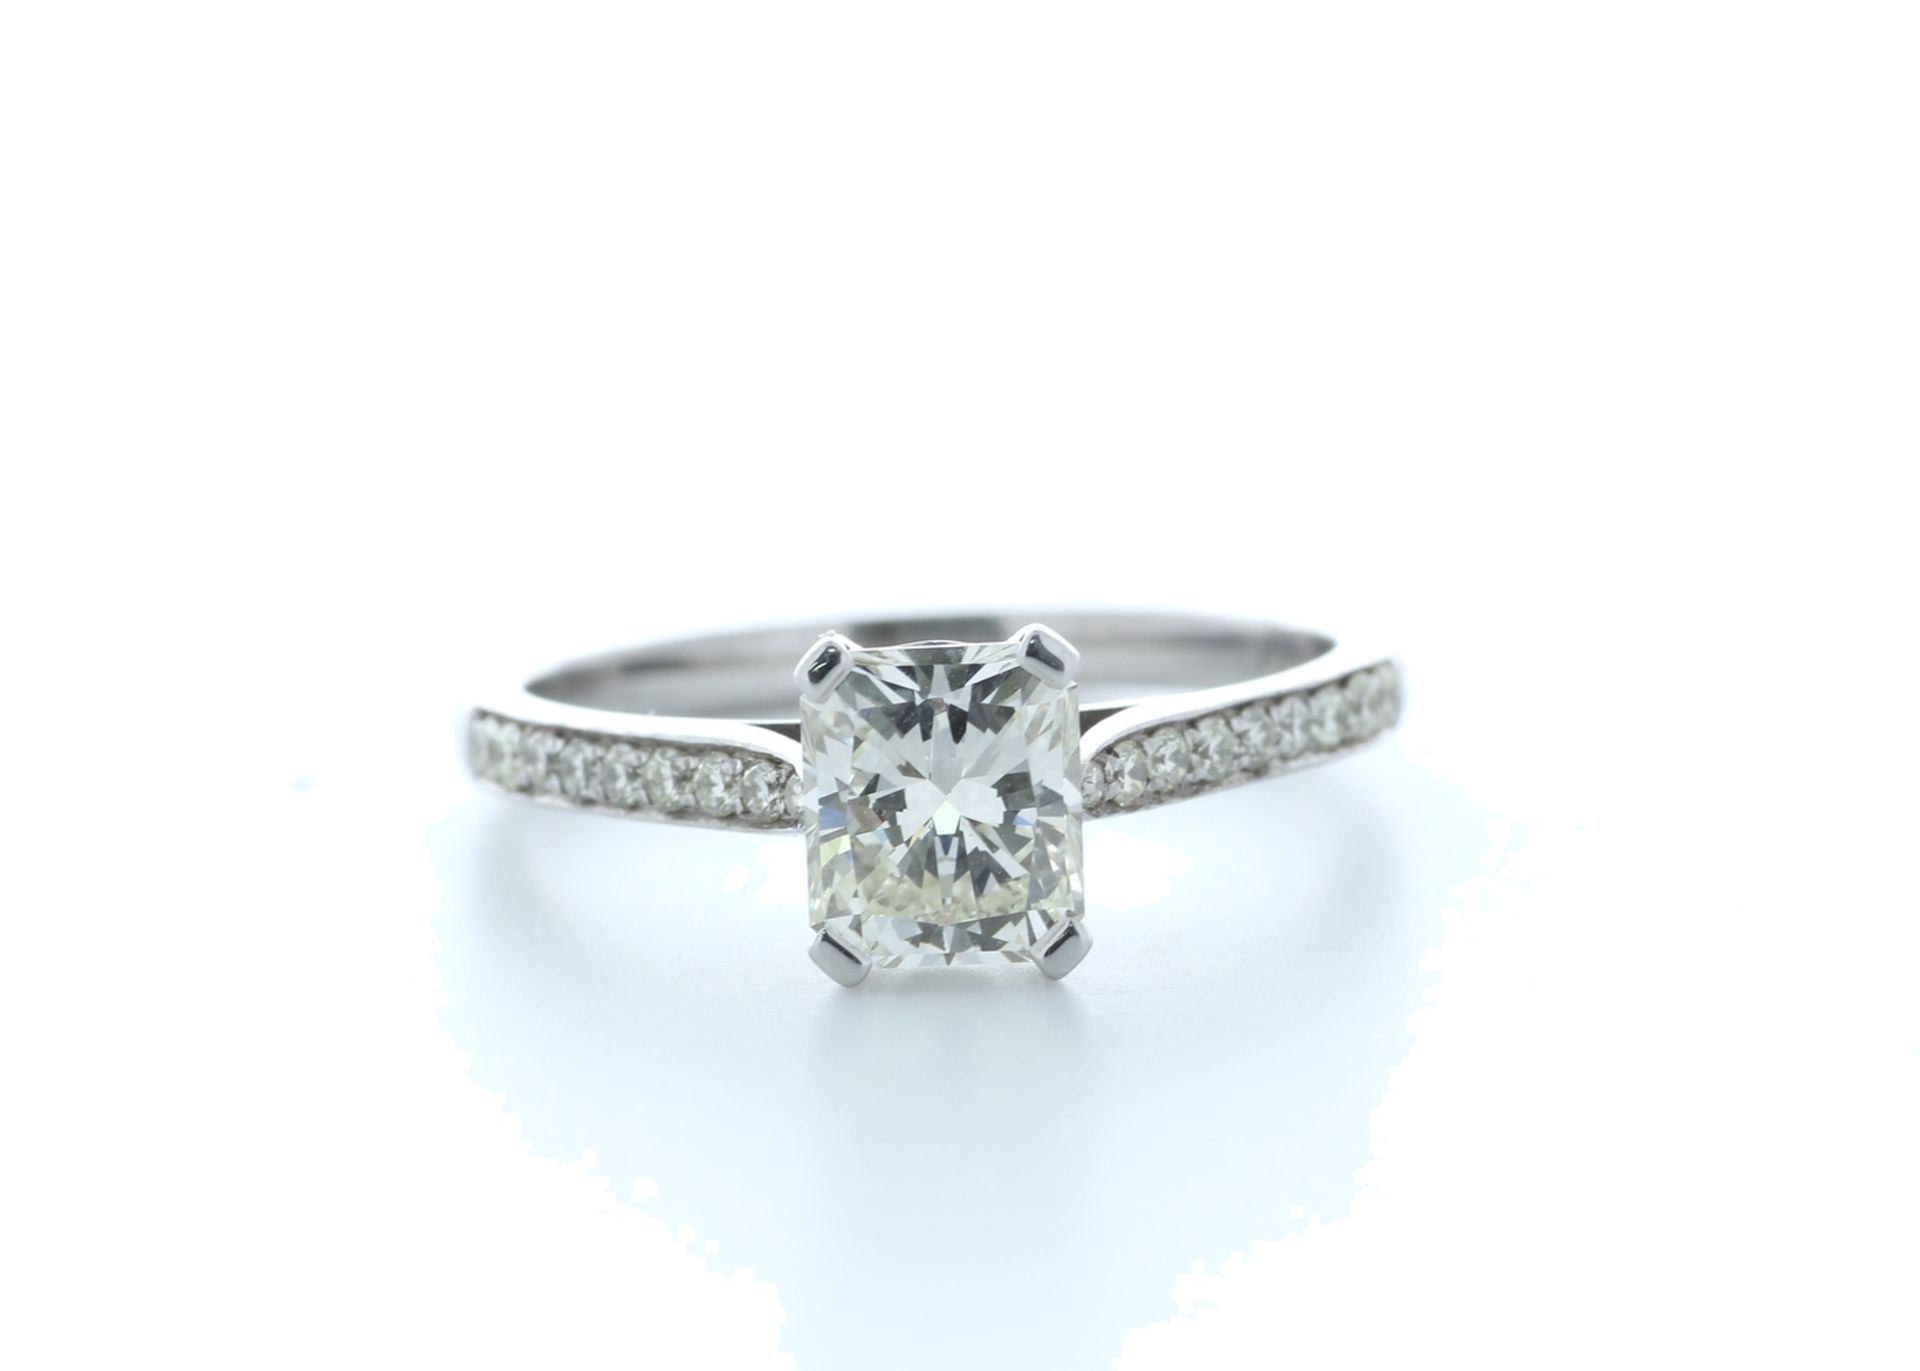 18ct White Gold Radiant Cut Diamond Ring 1.36 (1.19) Carats - Valued by IDI £19,500.00 - 18ct